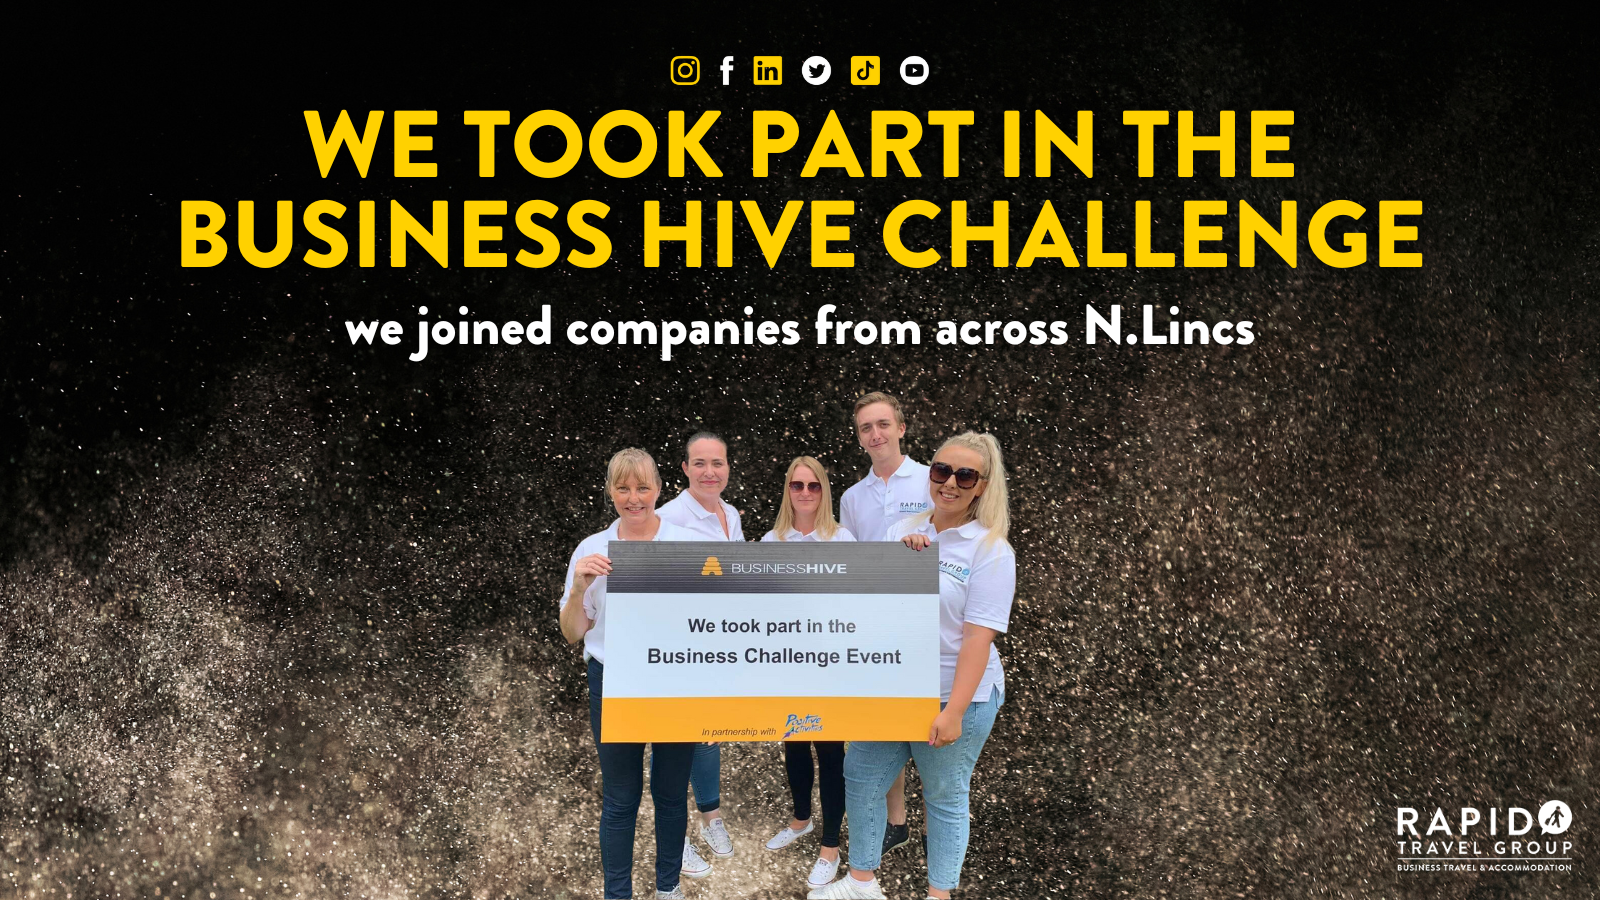 We took part in the Business Hive Challenge.